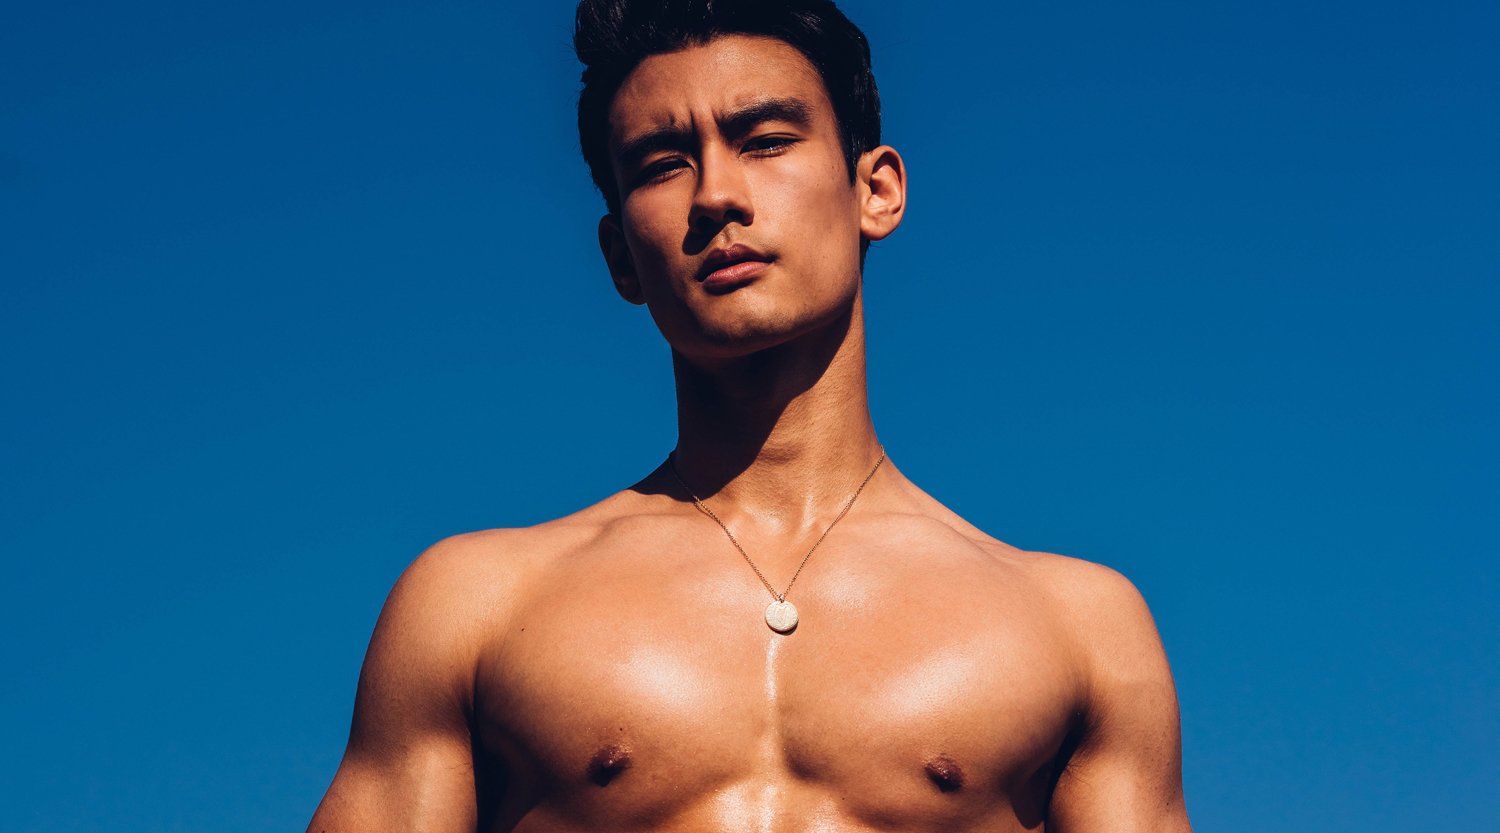 Grey’s Anatomy’s Alex Landi Discusses Straight Actors Playing Gay Roles.